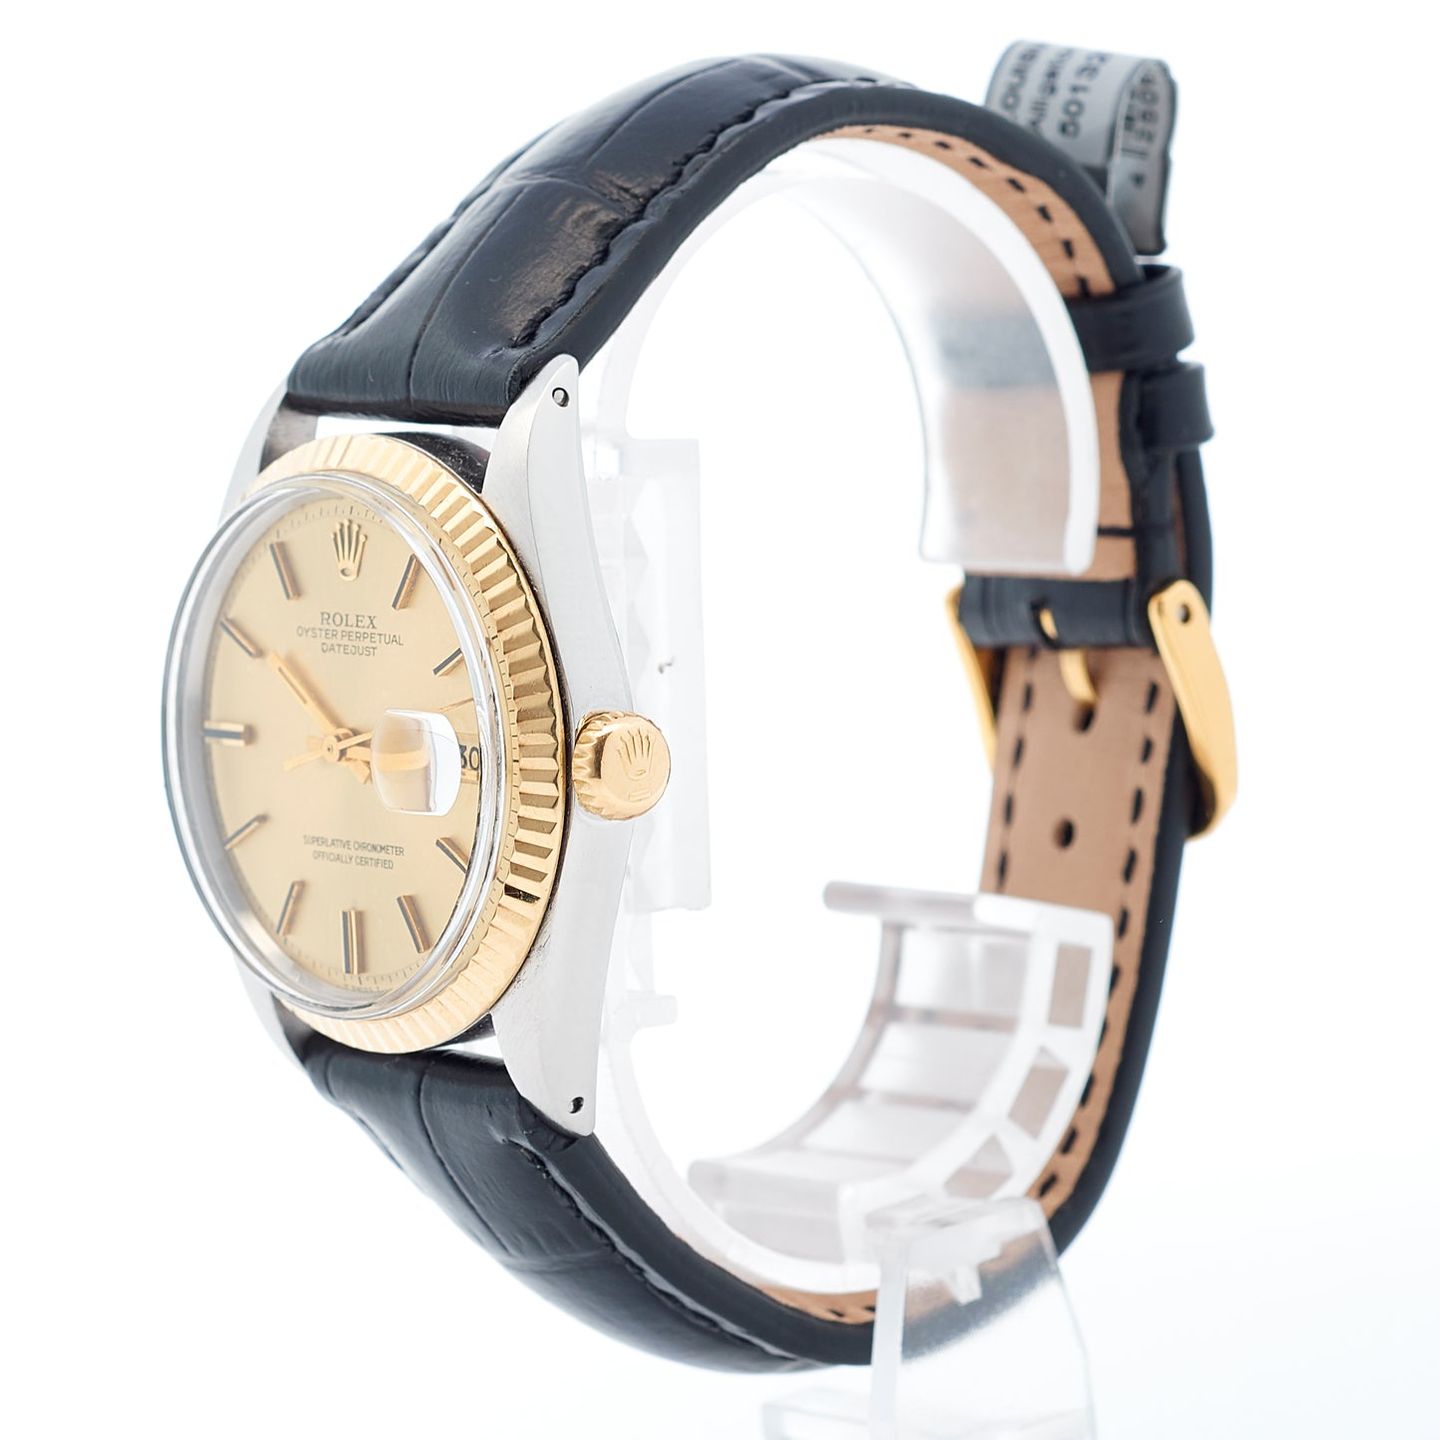 Rolex Datejust 36 16013 (1972) - Gold dial 36 mm Gold/Steel case (3/5)